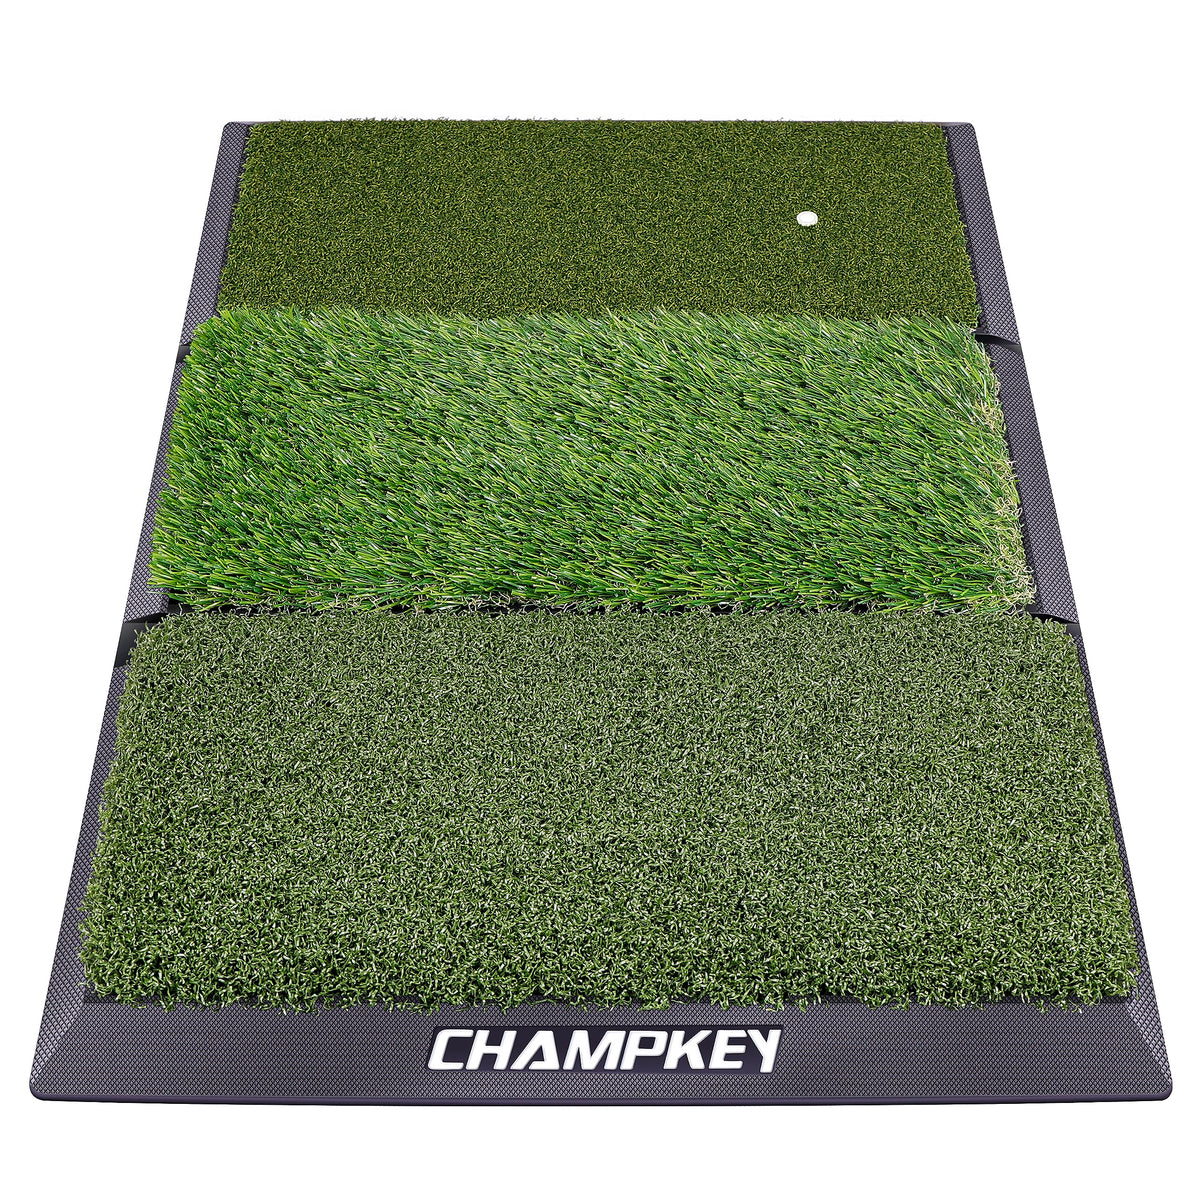 CHAMPKEY Professional Tri-Turf Golf Hitting Mat | Heavy Duty Rubber Backing Practice Mat Ideal for Indoor and Outdoor Training